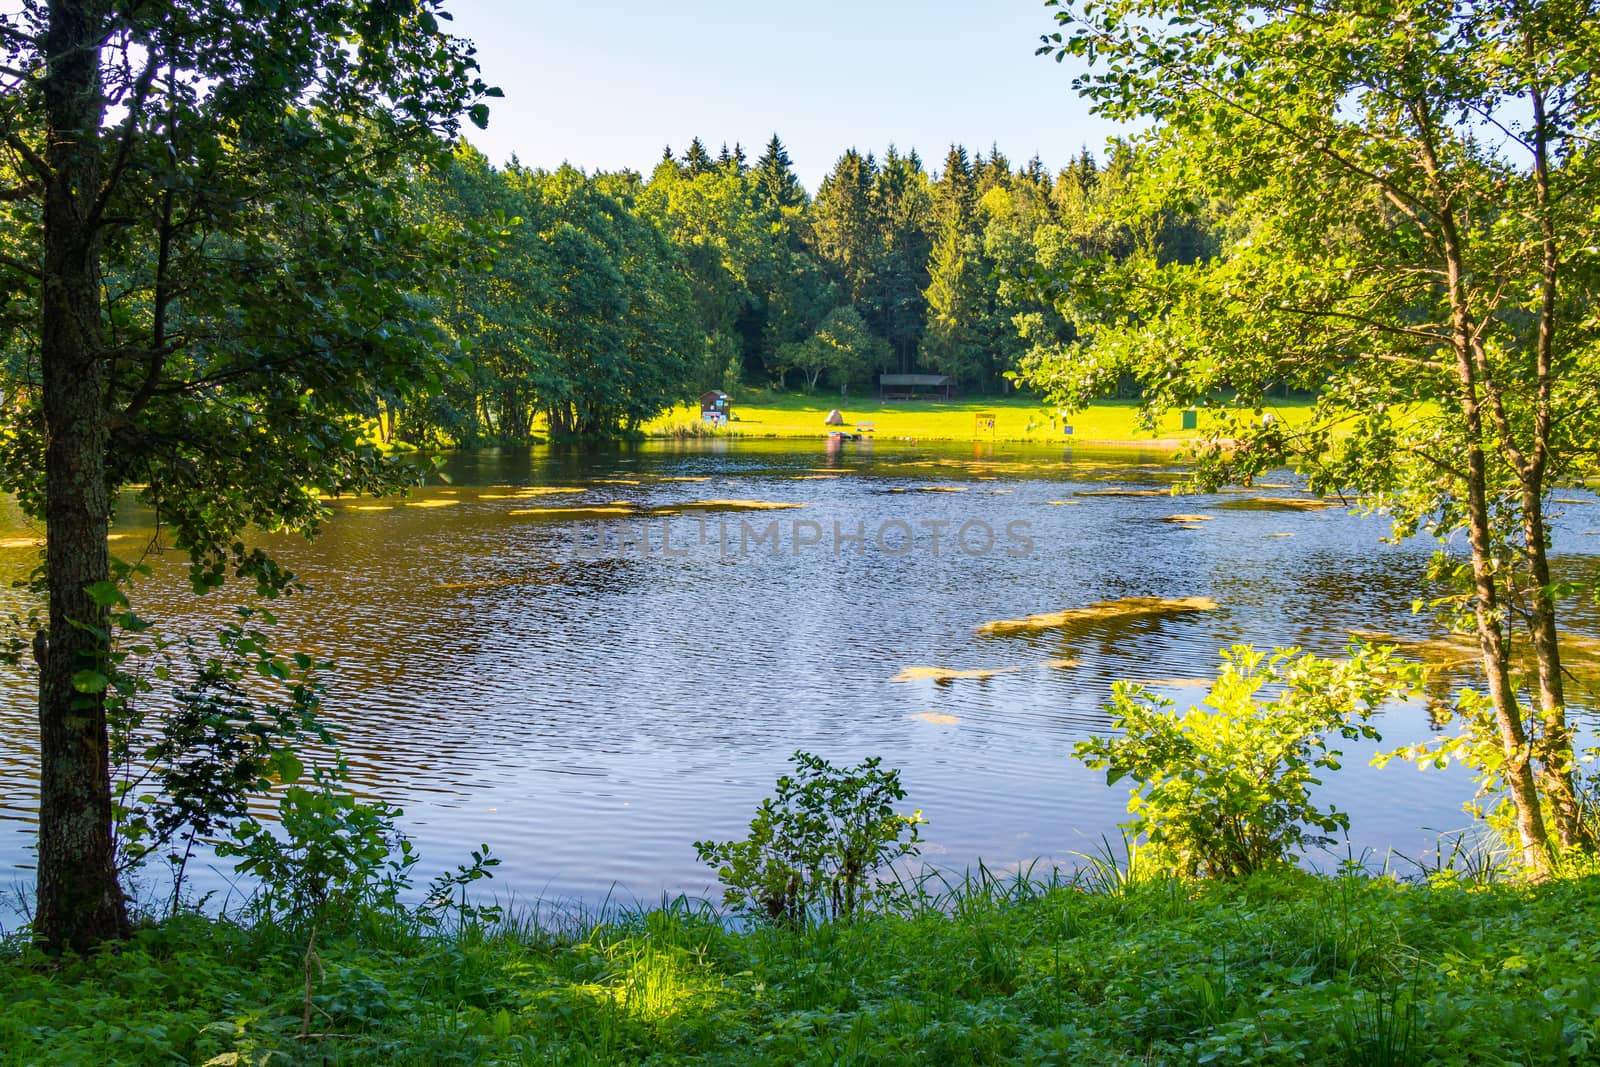 A beautiful glade with green grass in the shade of trees on the shore of a picturesque pond. A great place to relax or picnic.